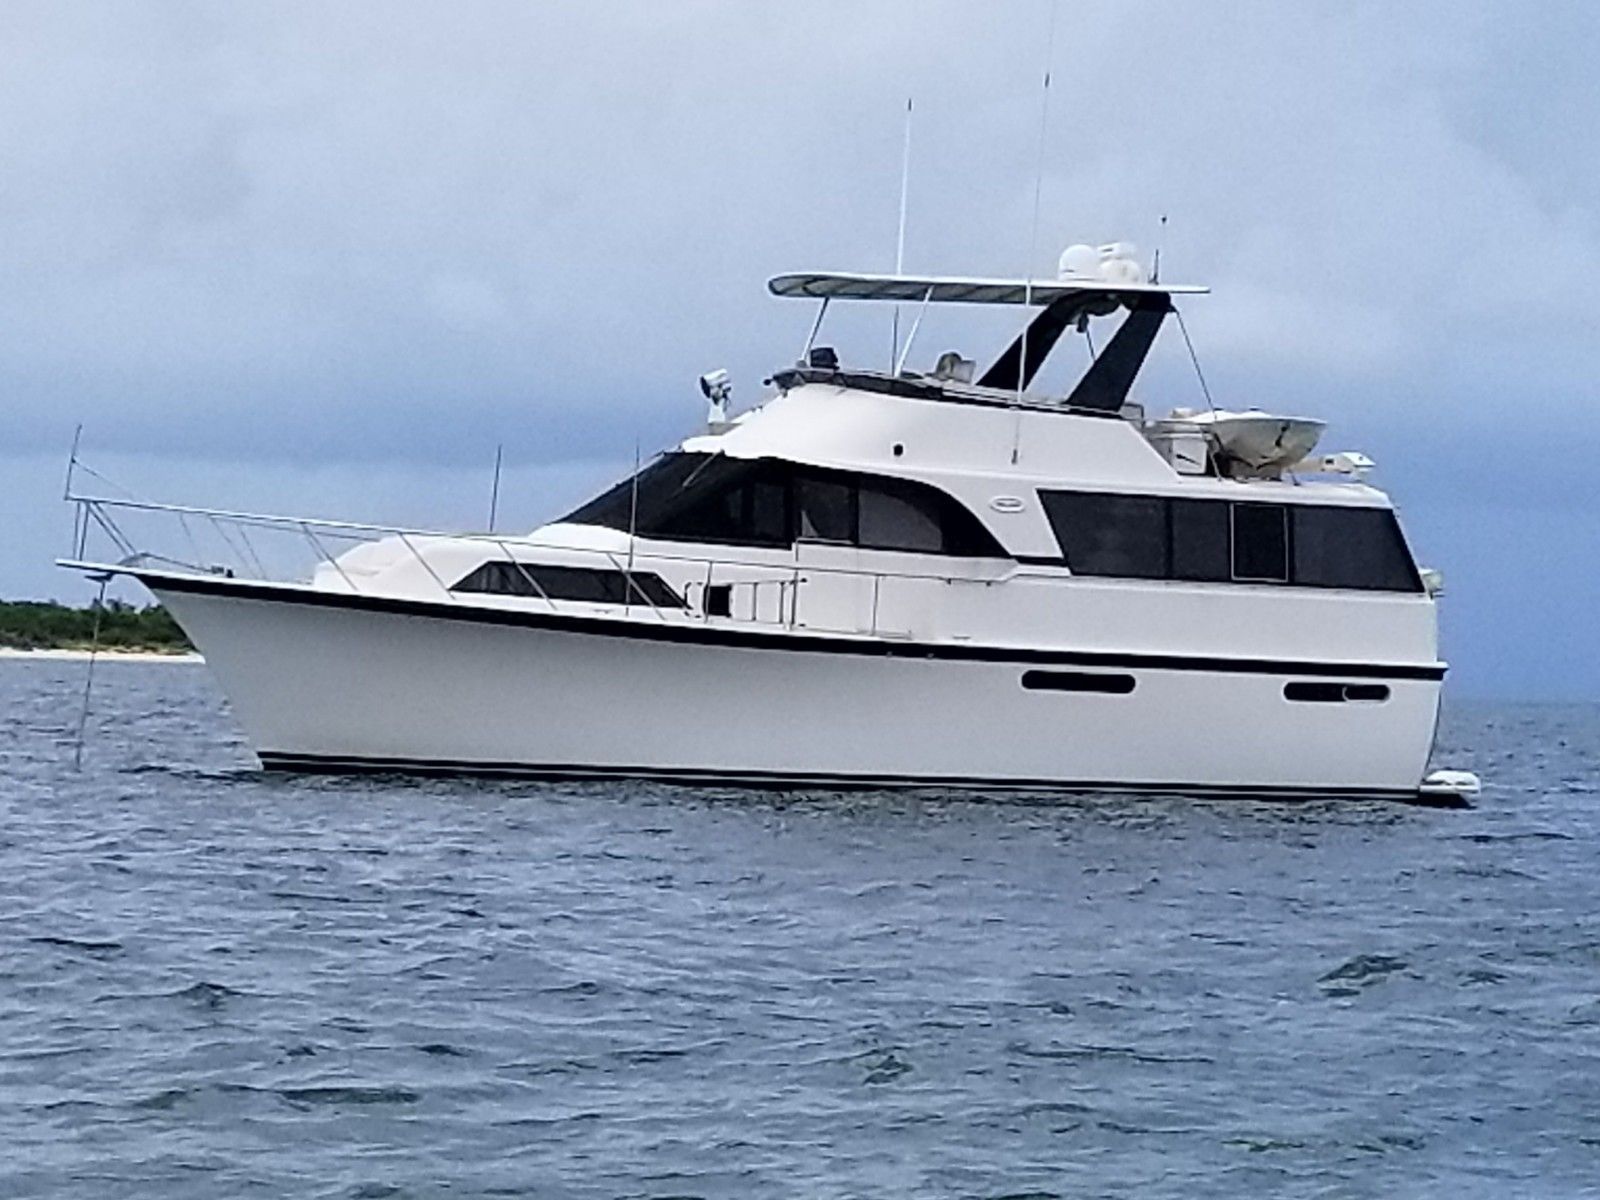 48 foot motor yacht for sale